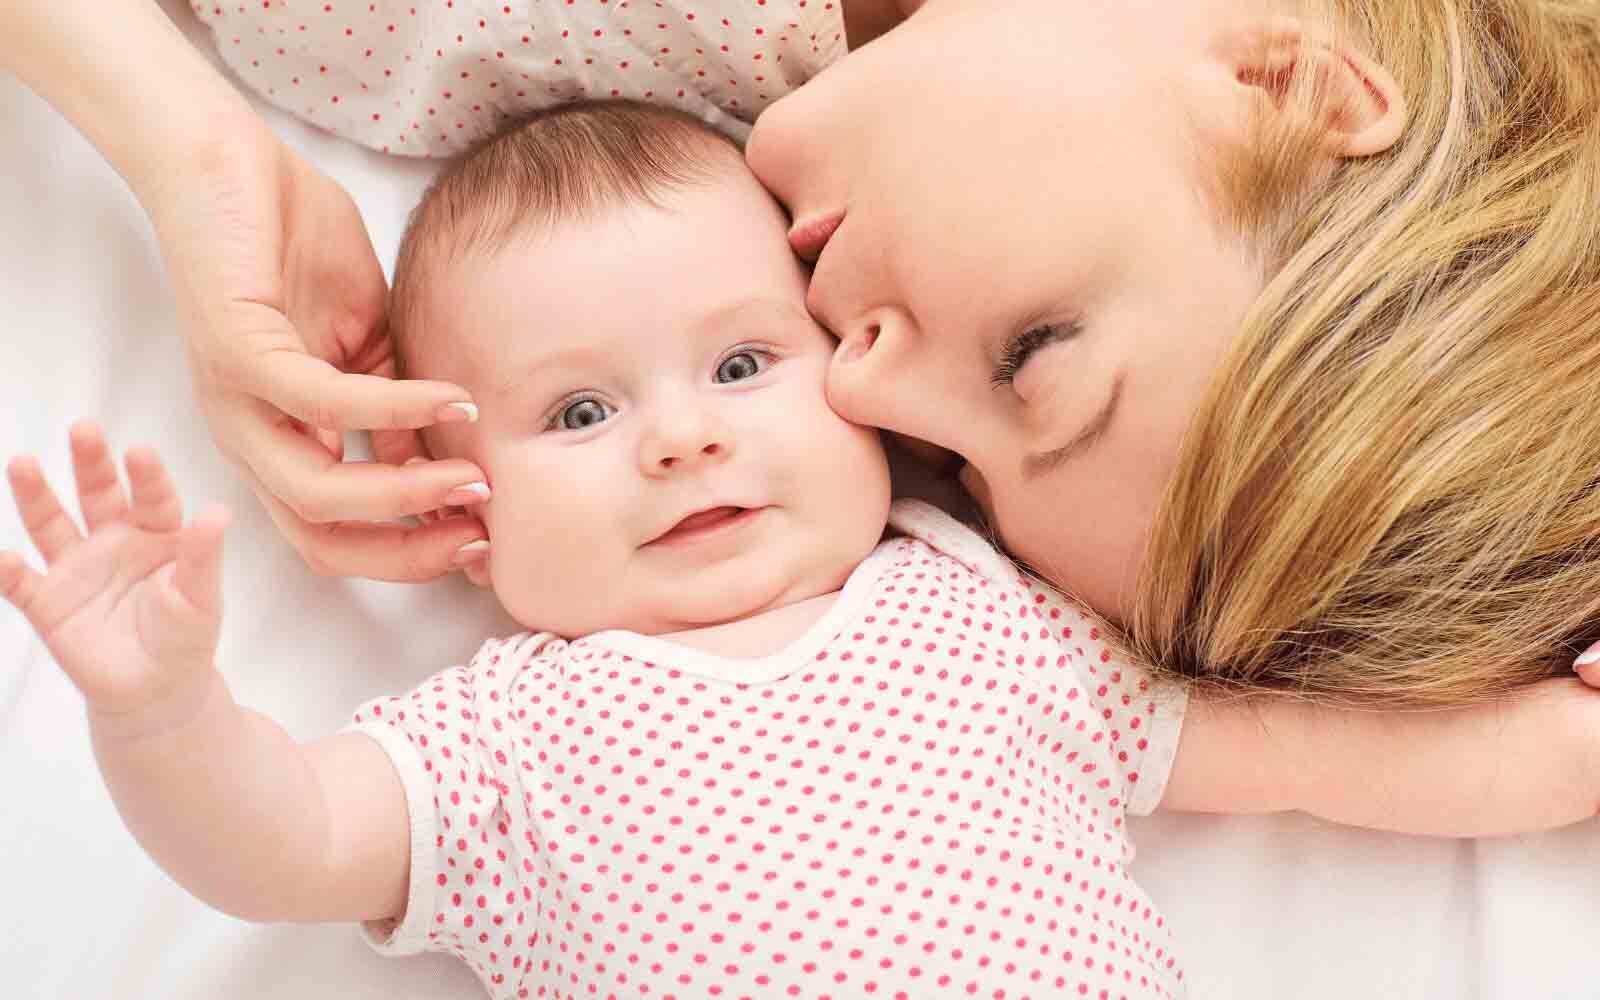 Should You Use a Baby Sleep Consultant?